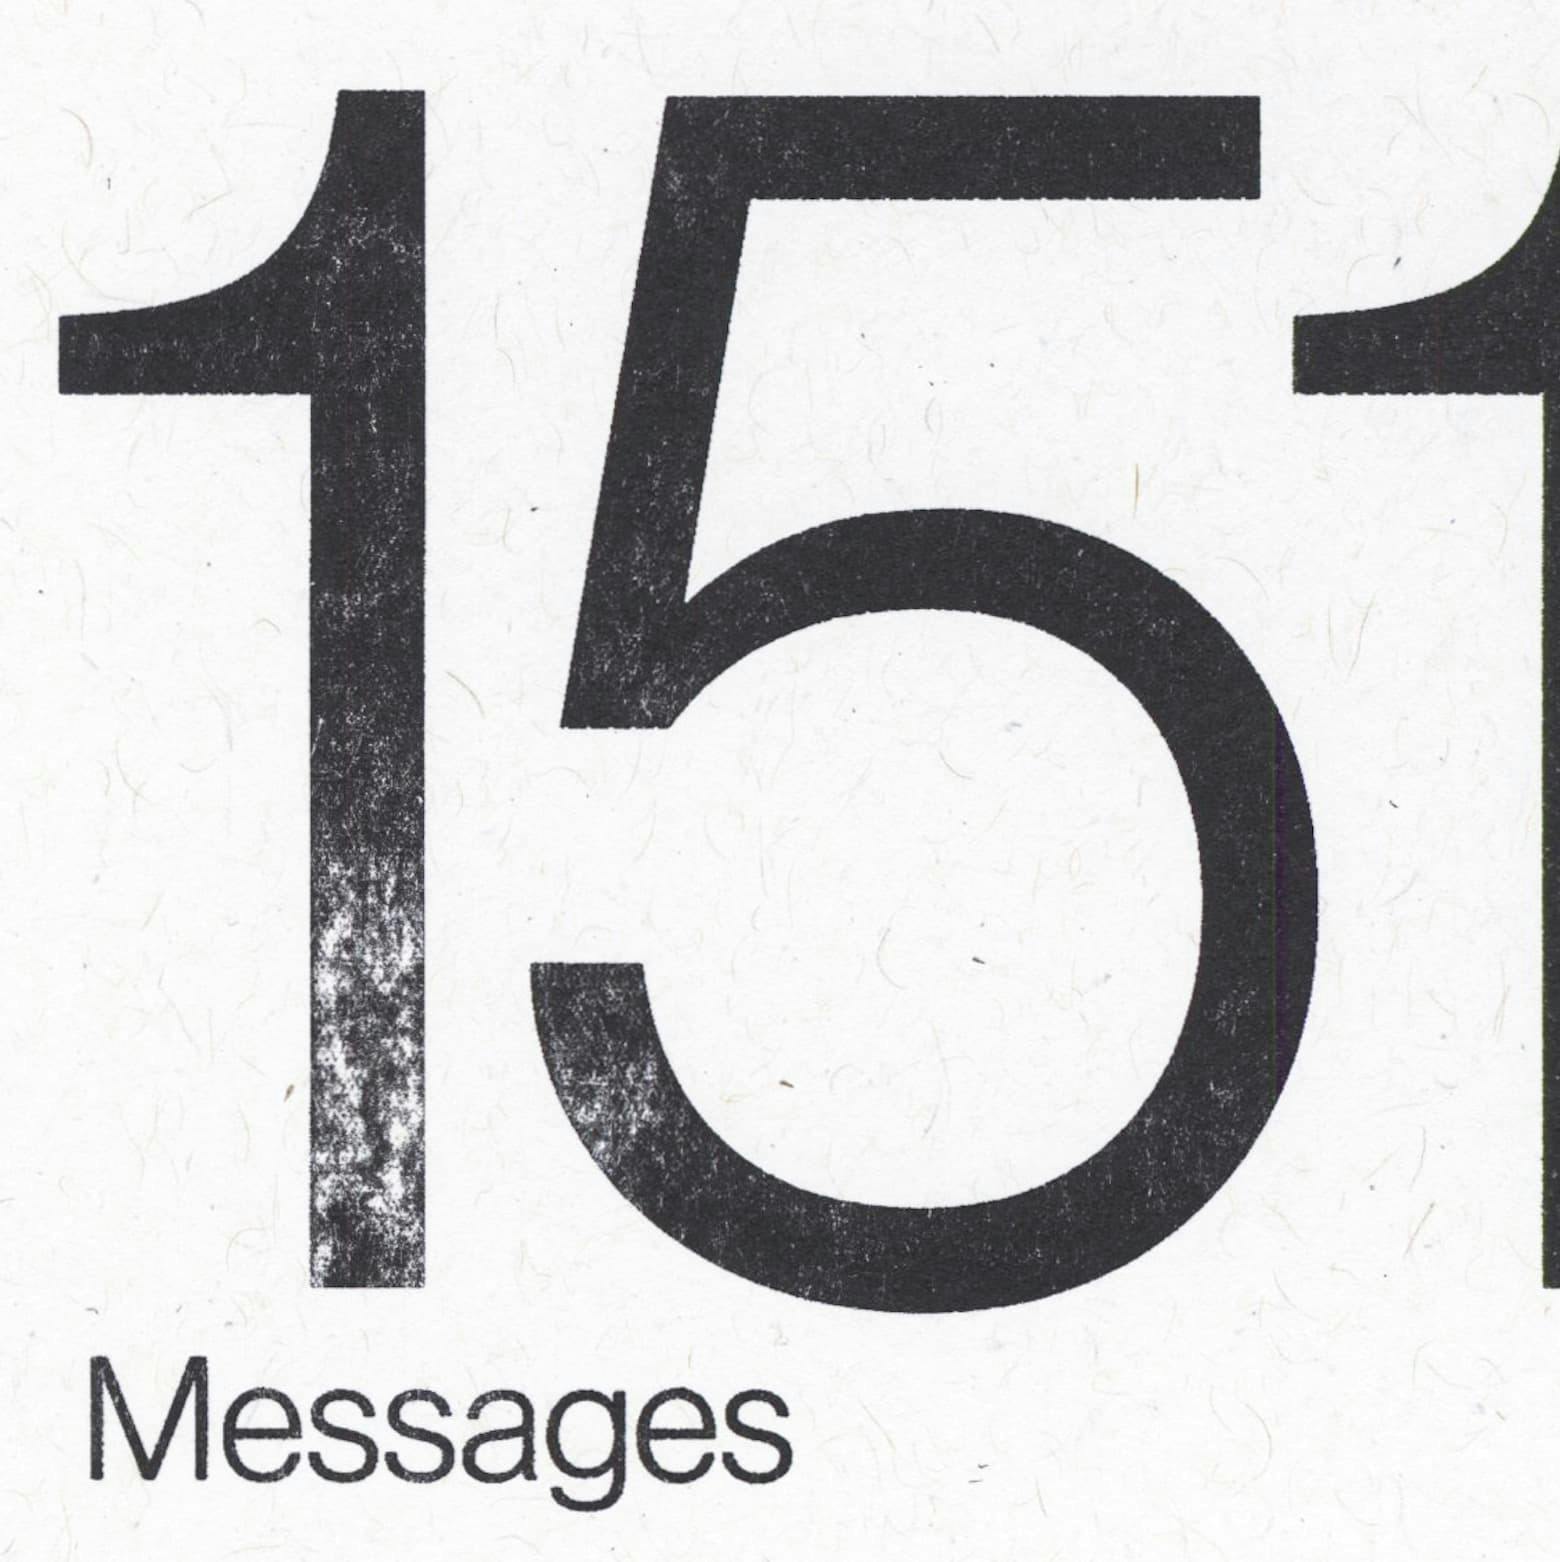 Close-up of "151" with the label "Messages", highlighting the print texture and details of risograph prints.